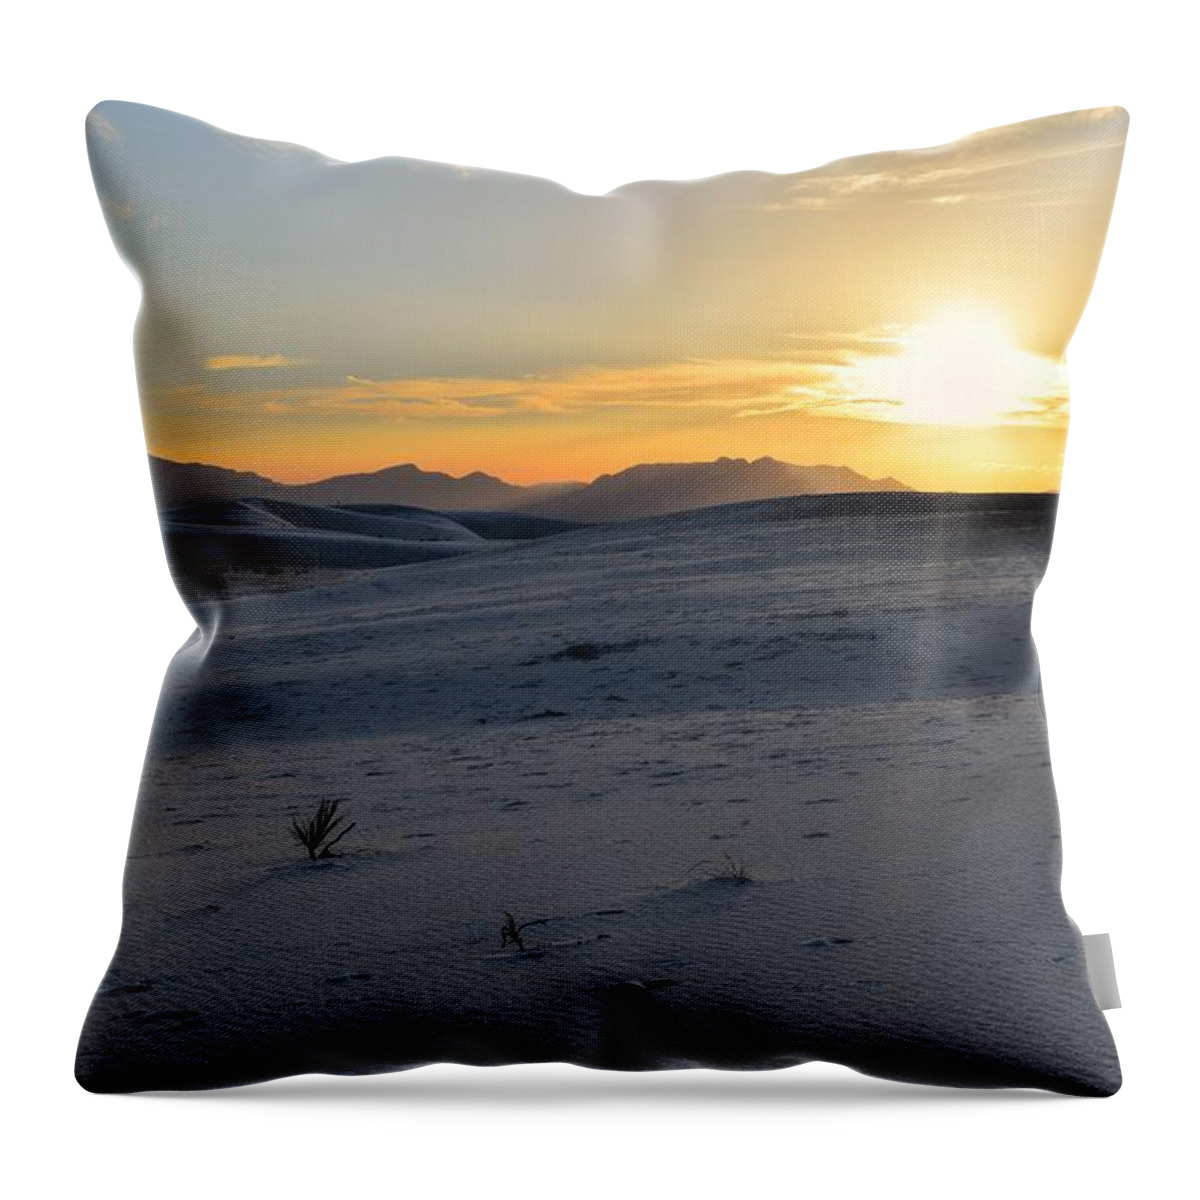 White Sands Throw Pillow featuring the photograph White Sands, New Mexico Sun by Chance Kafka